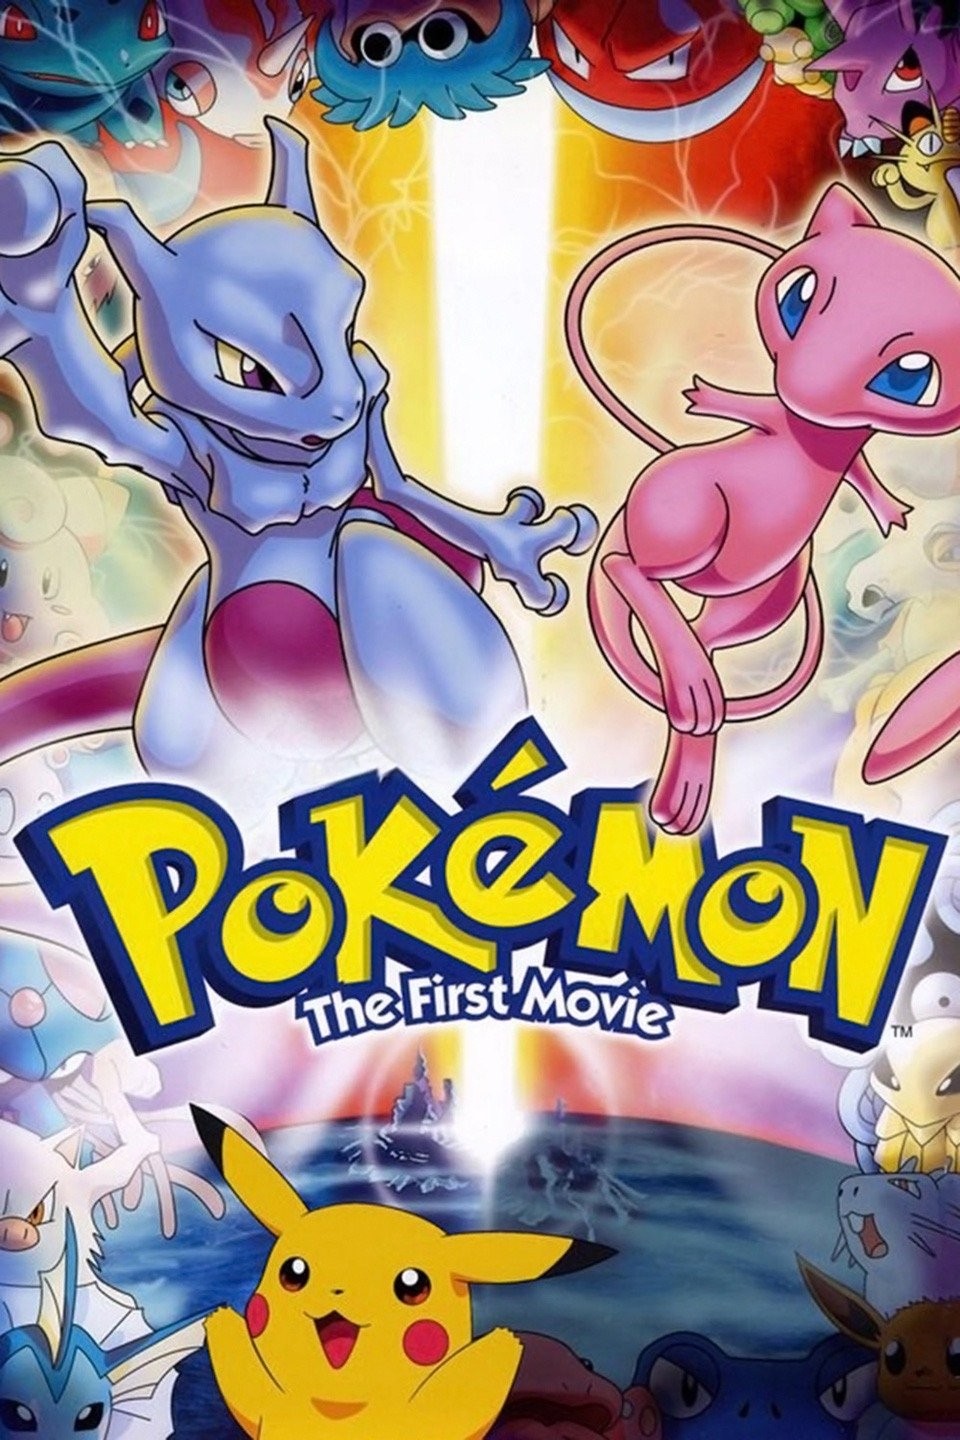 Forget Pokémon Black & White Remakes, There's Another We Need First - IMDb